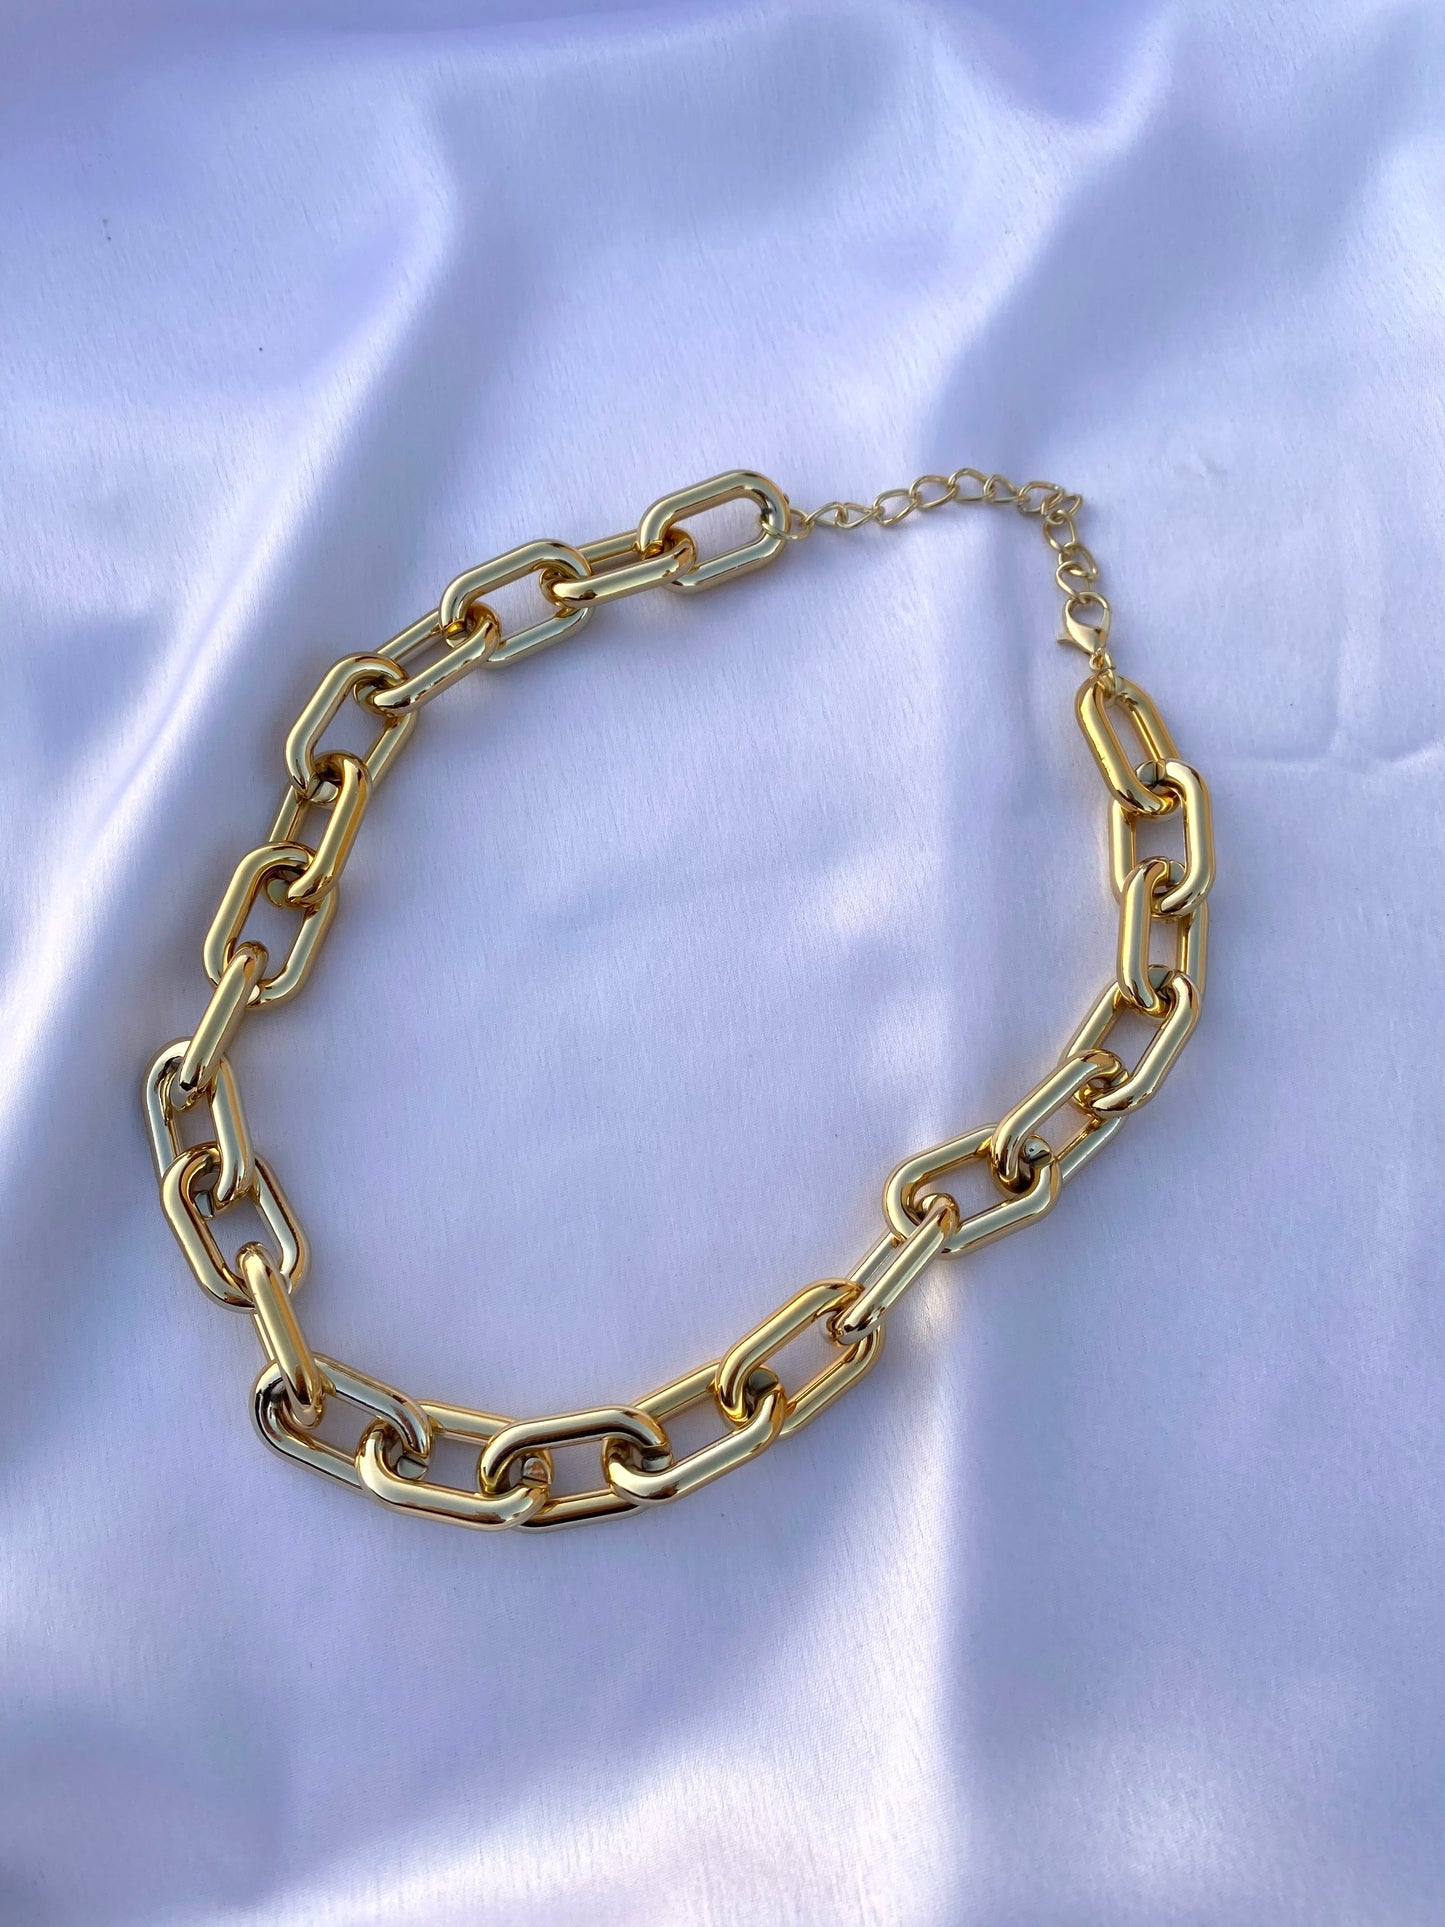 Round gold link chain necklace